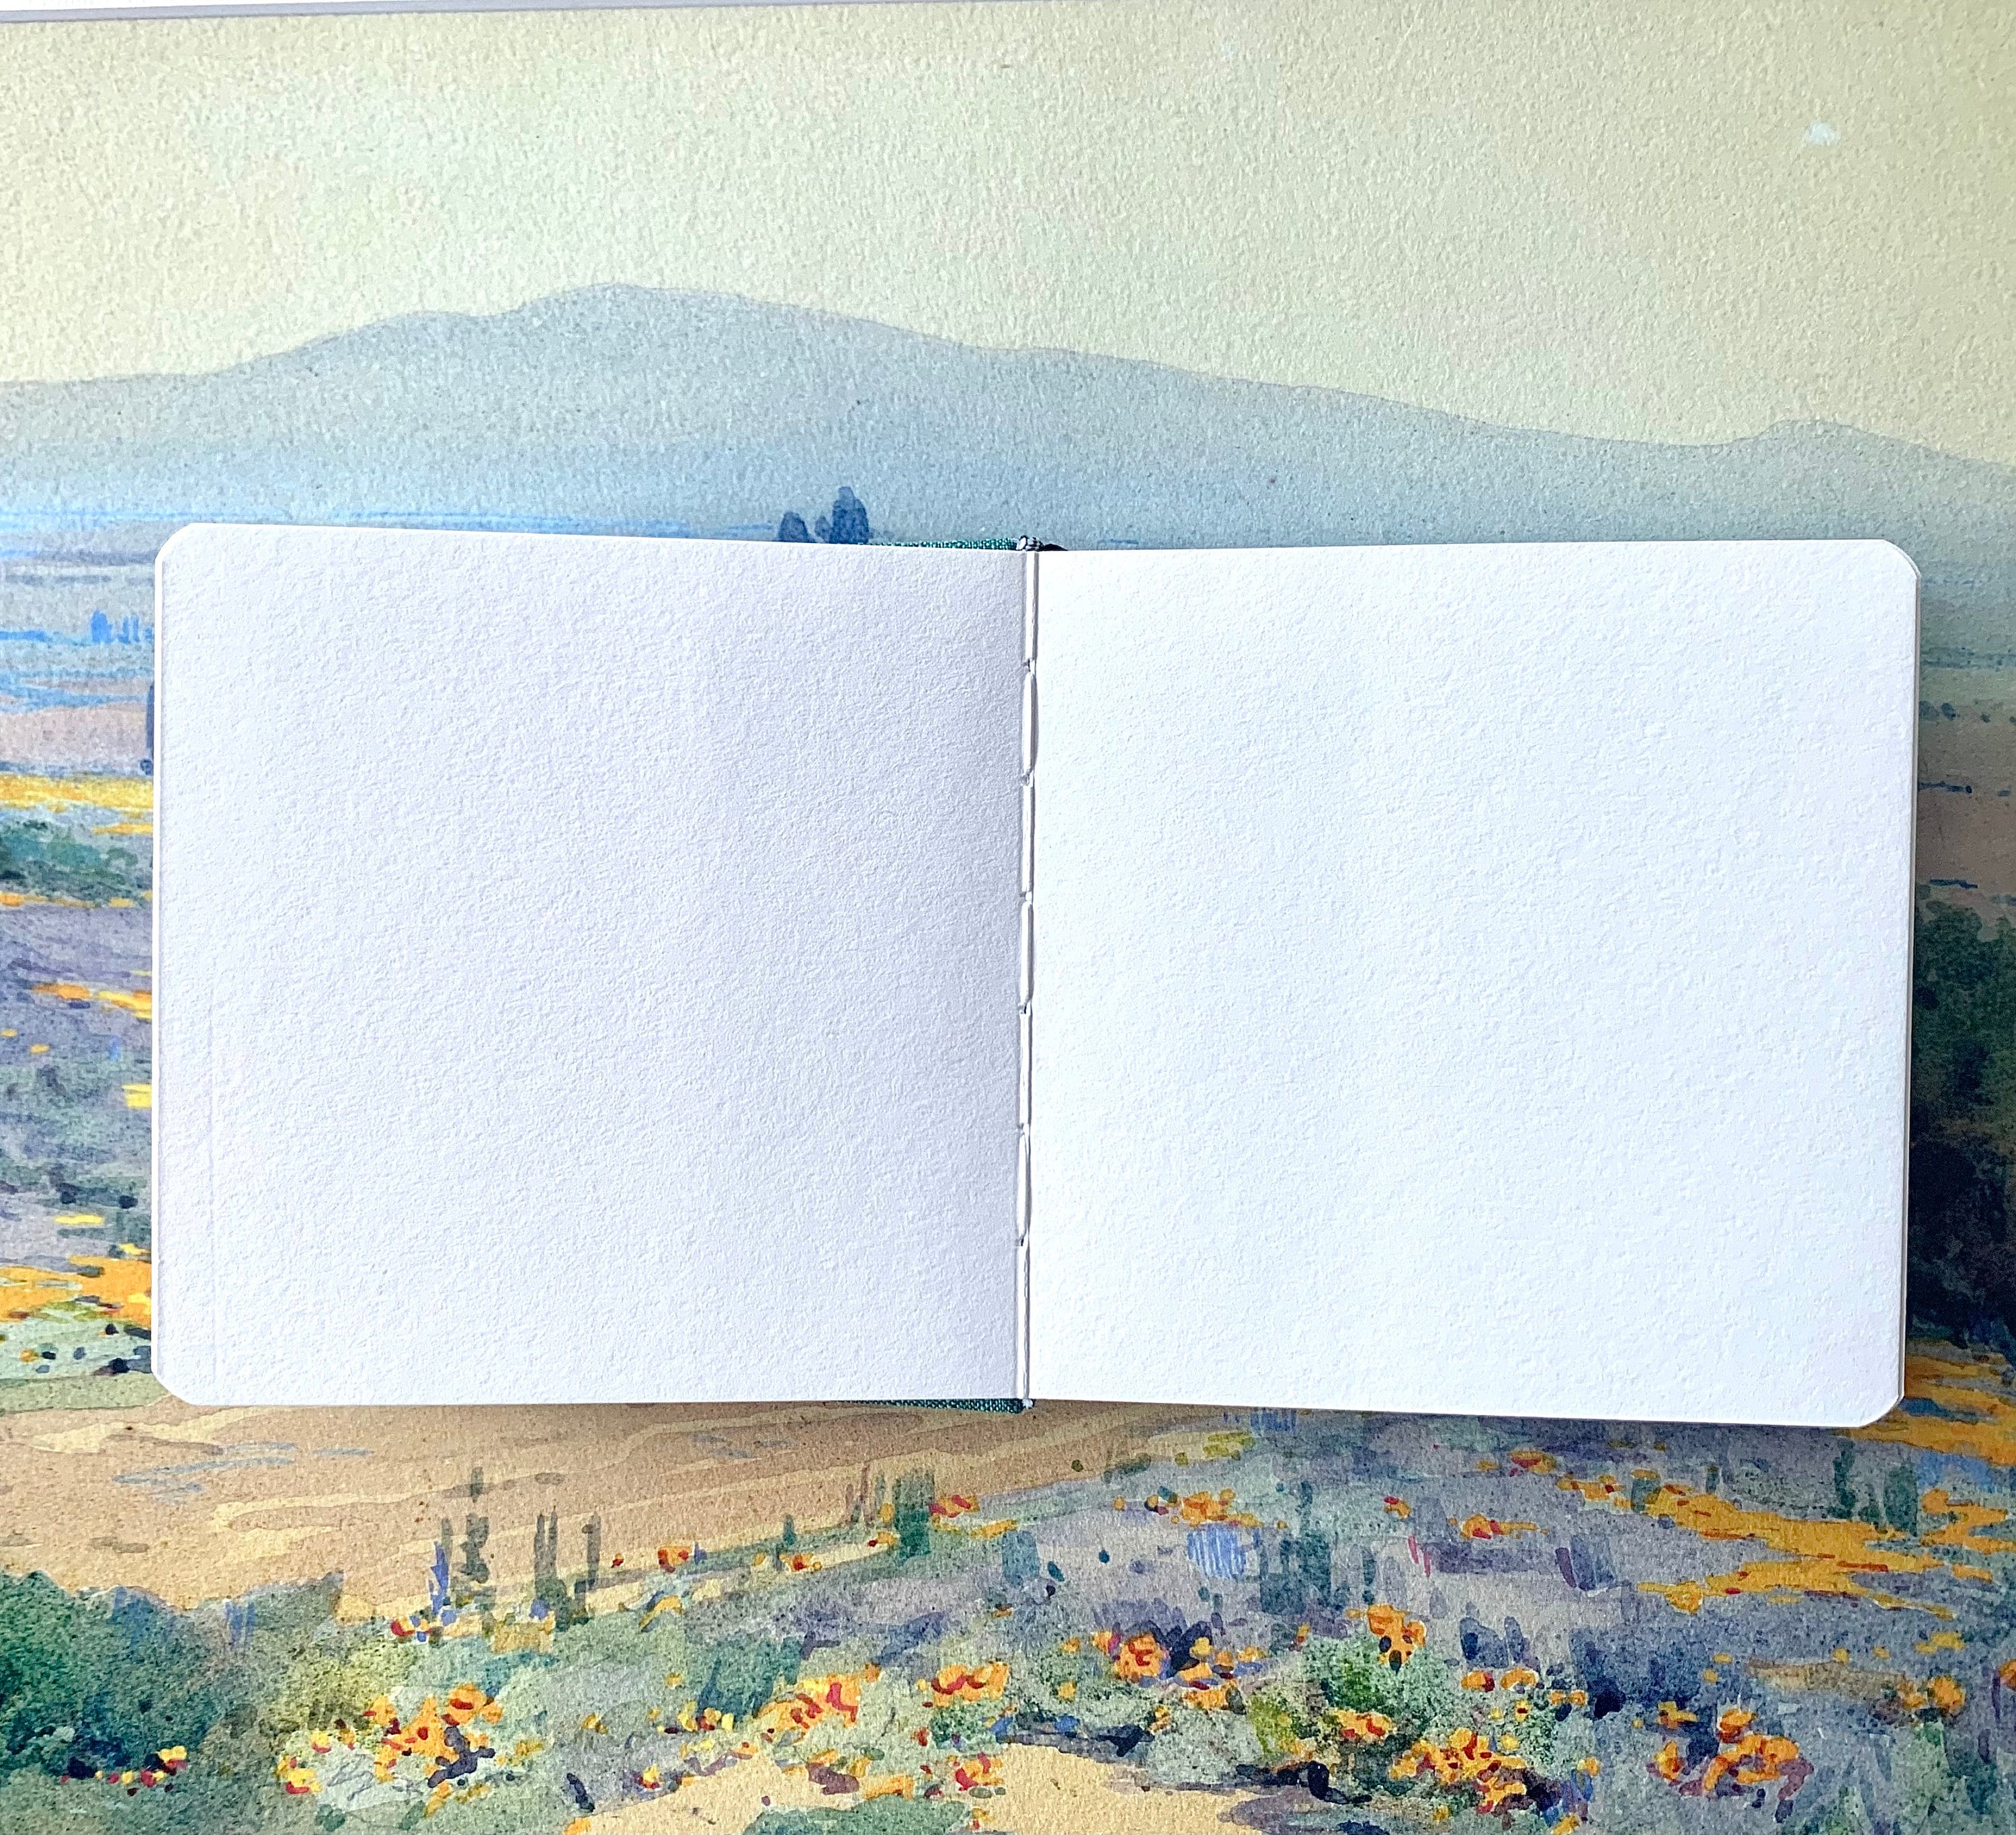 Watercolor Sketchbook With Hard Covers. 100% Cotton. 24 Sheets, Artist  Quality. Aquarelle Paper. 